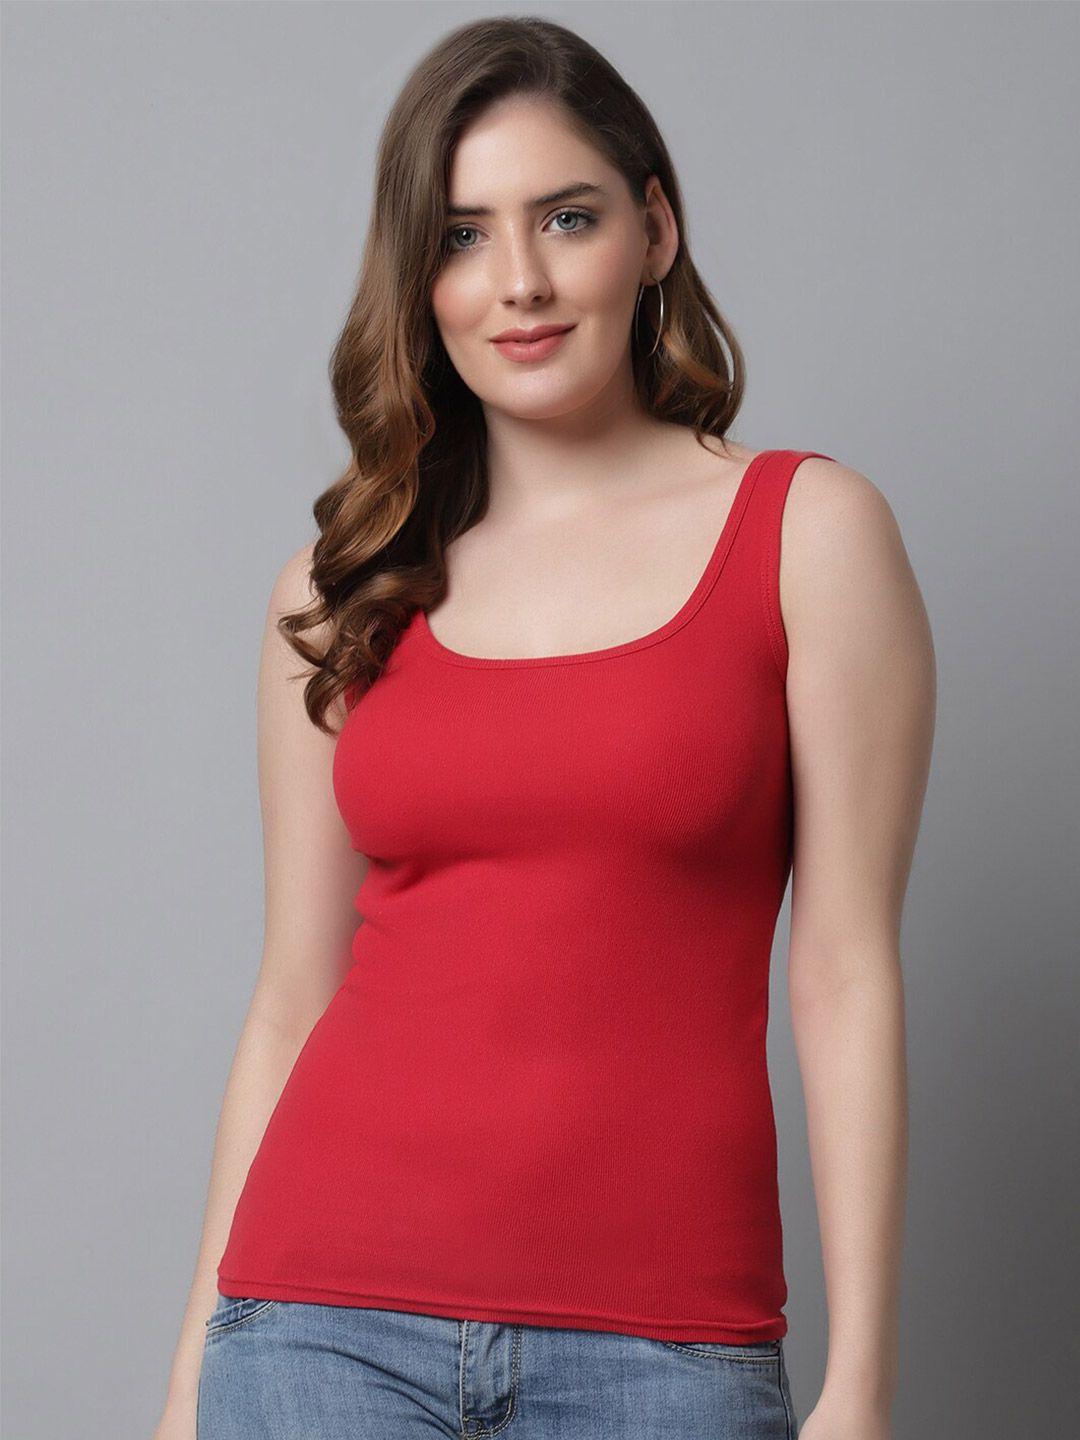 kex-red-scoop-neck-sleeveless-cotton-casual-tank-top